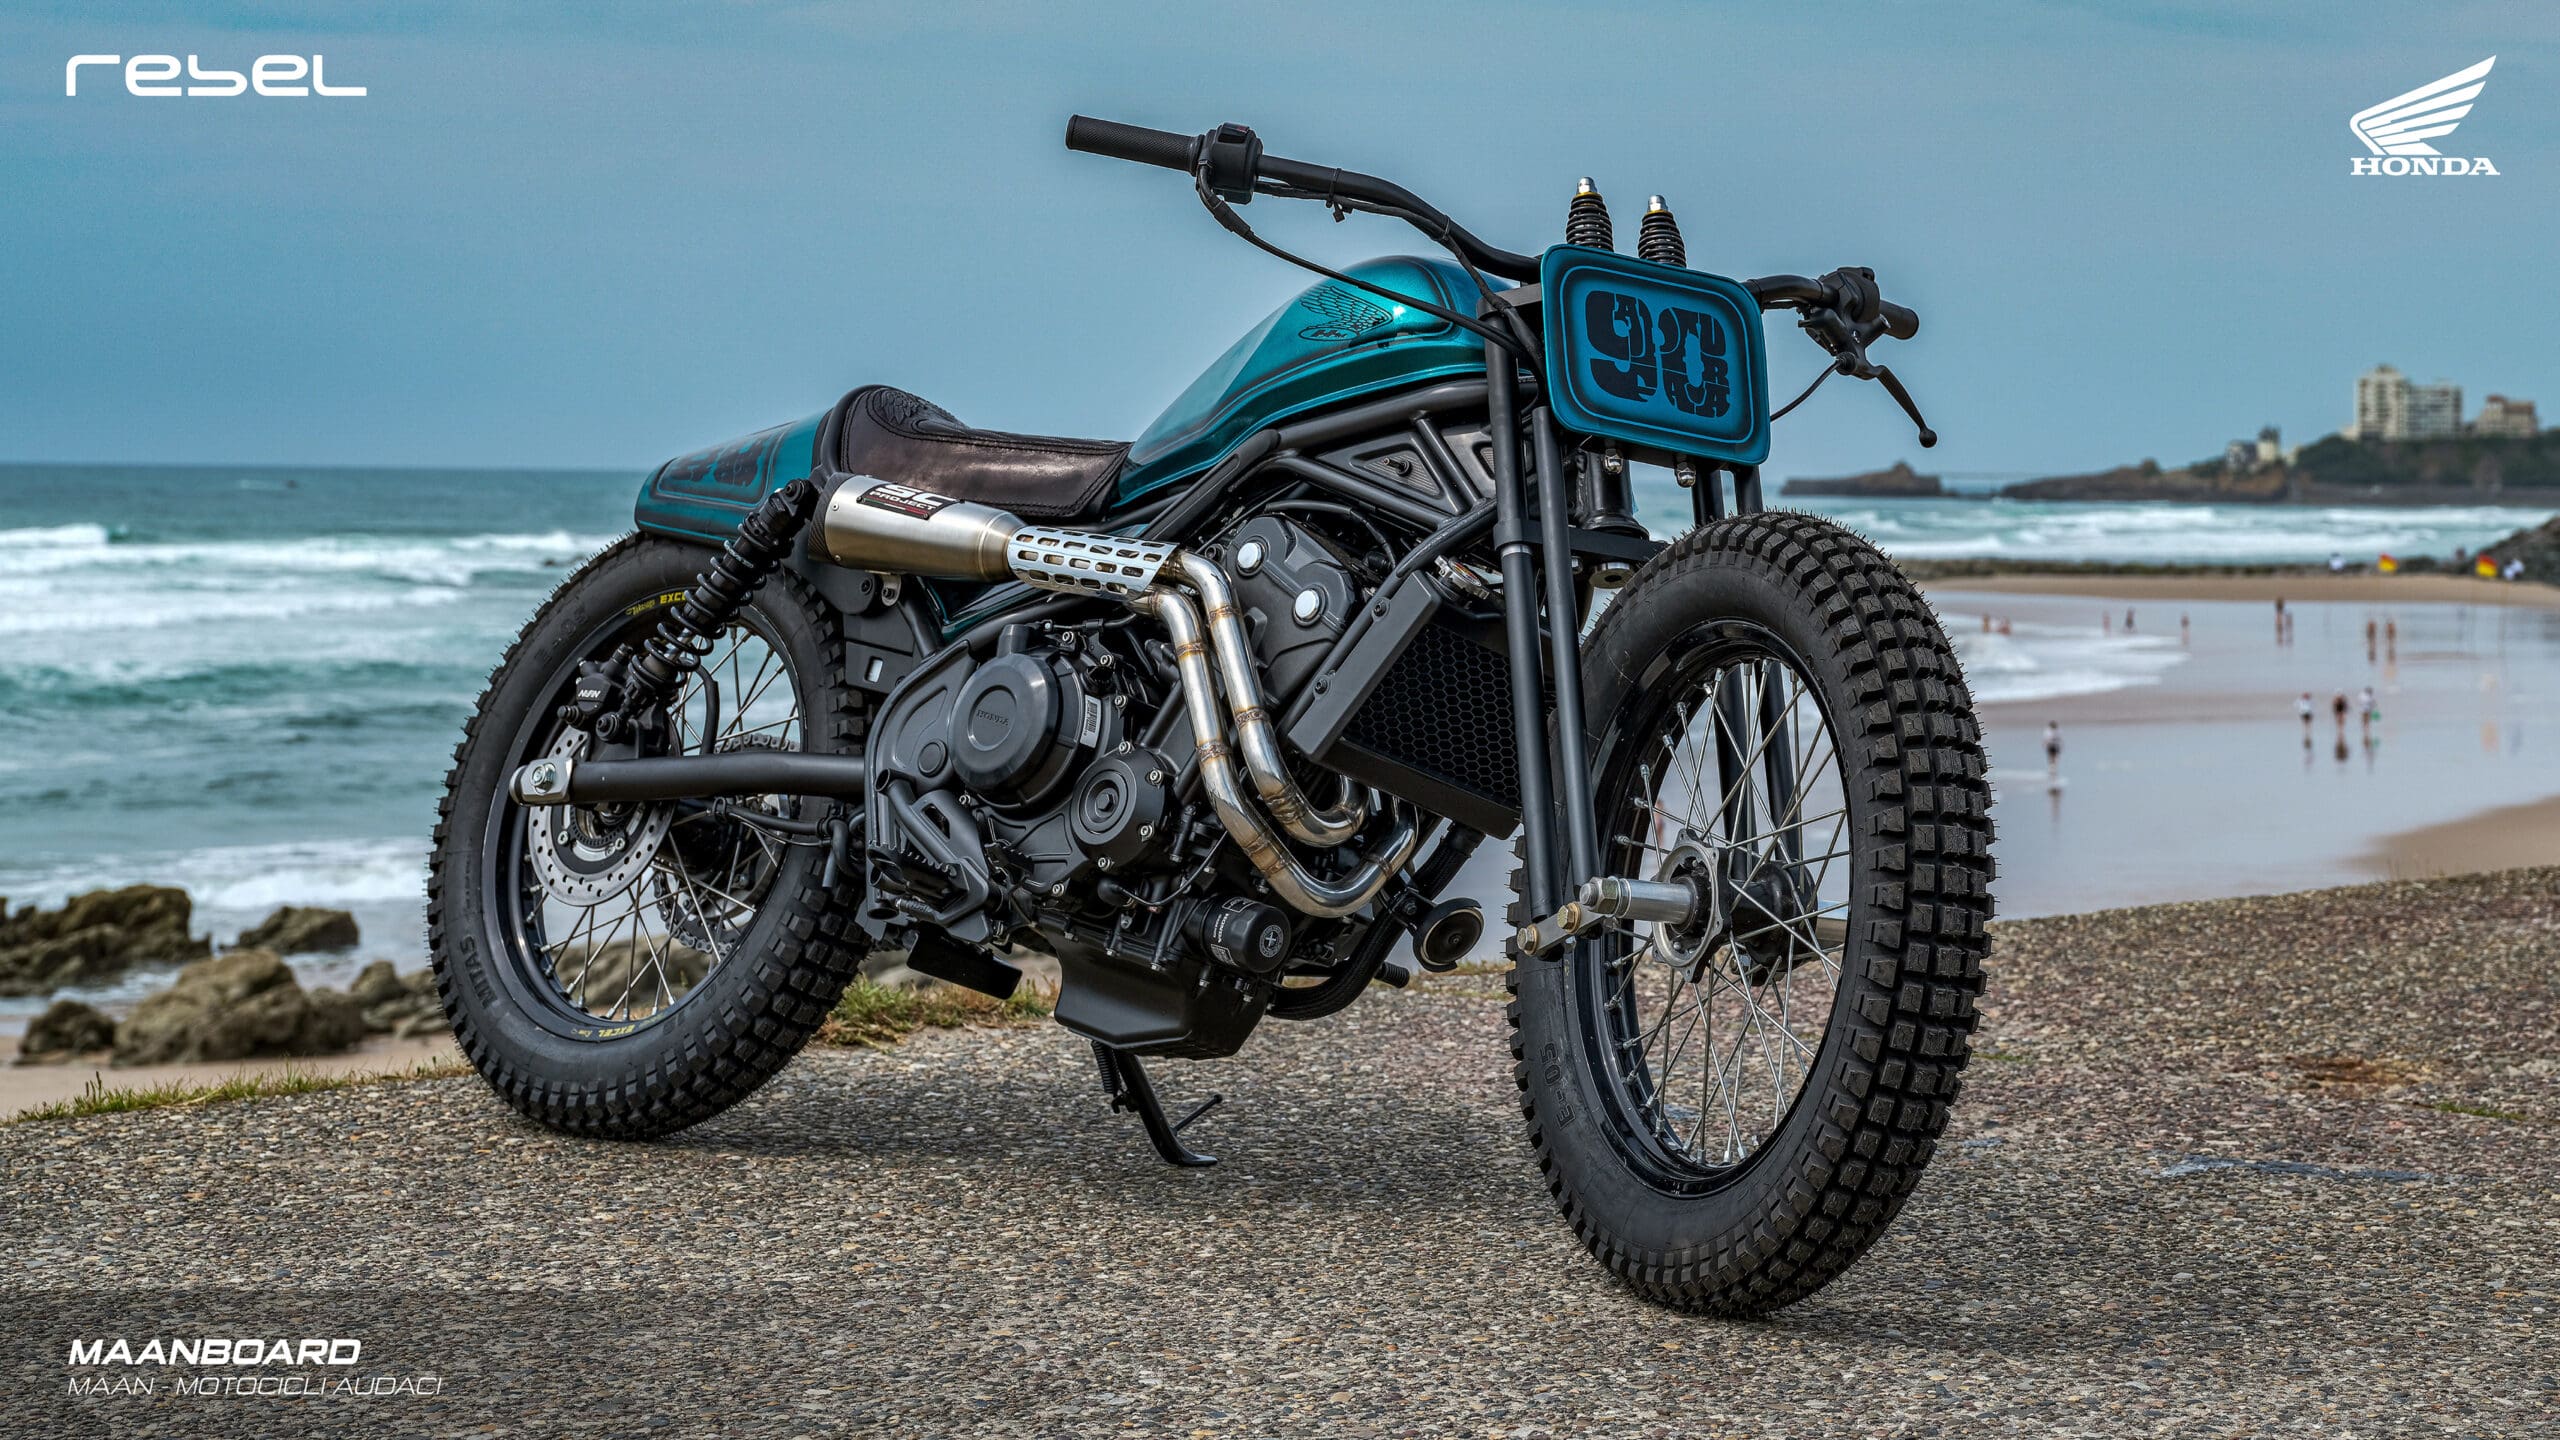 The customized Honda Rebels that are a part of Europe's Best Customized Honda Rebel Competition